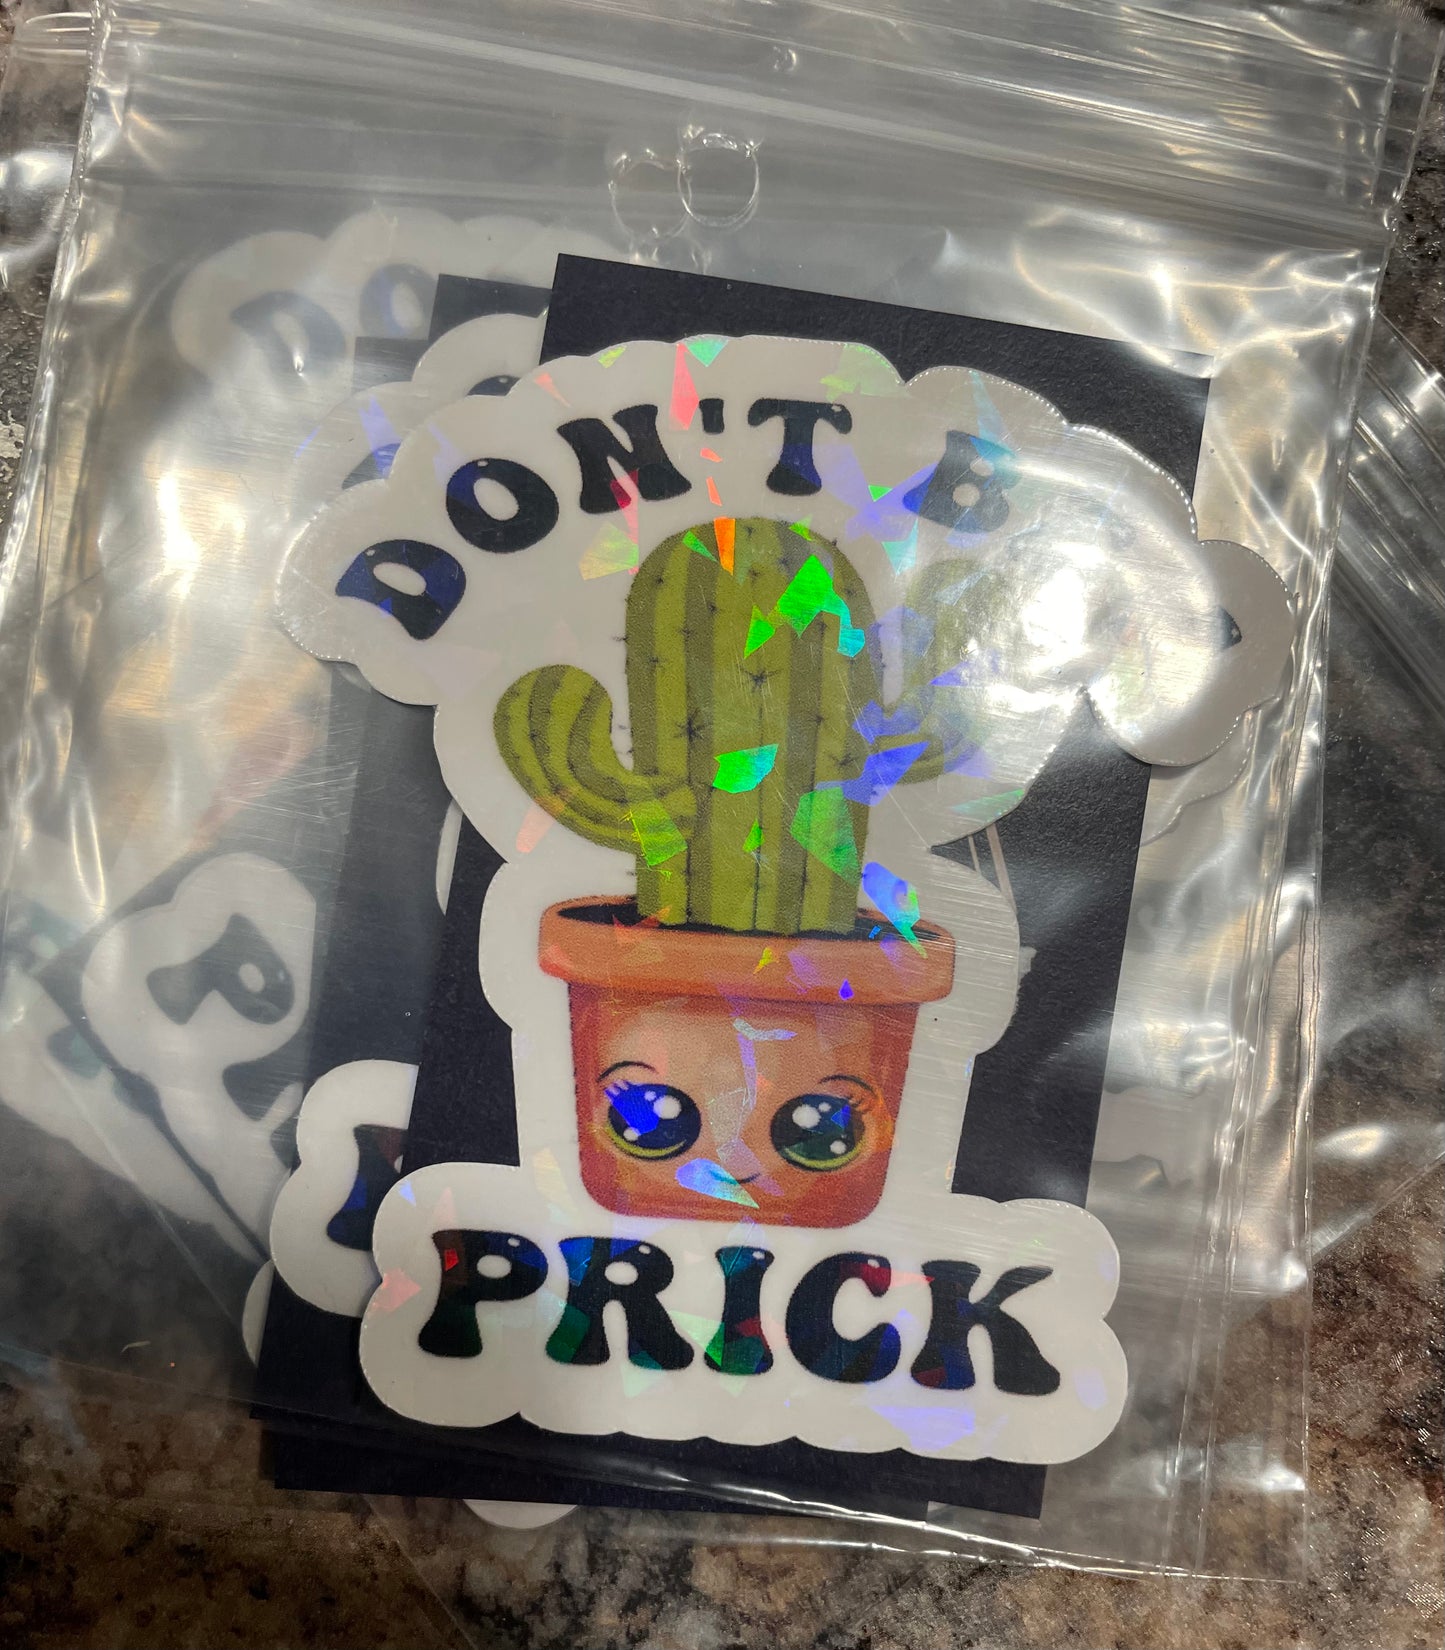 Don’t be a prick